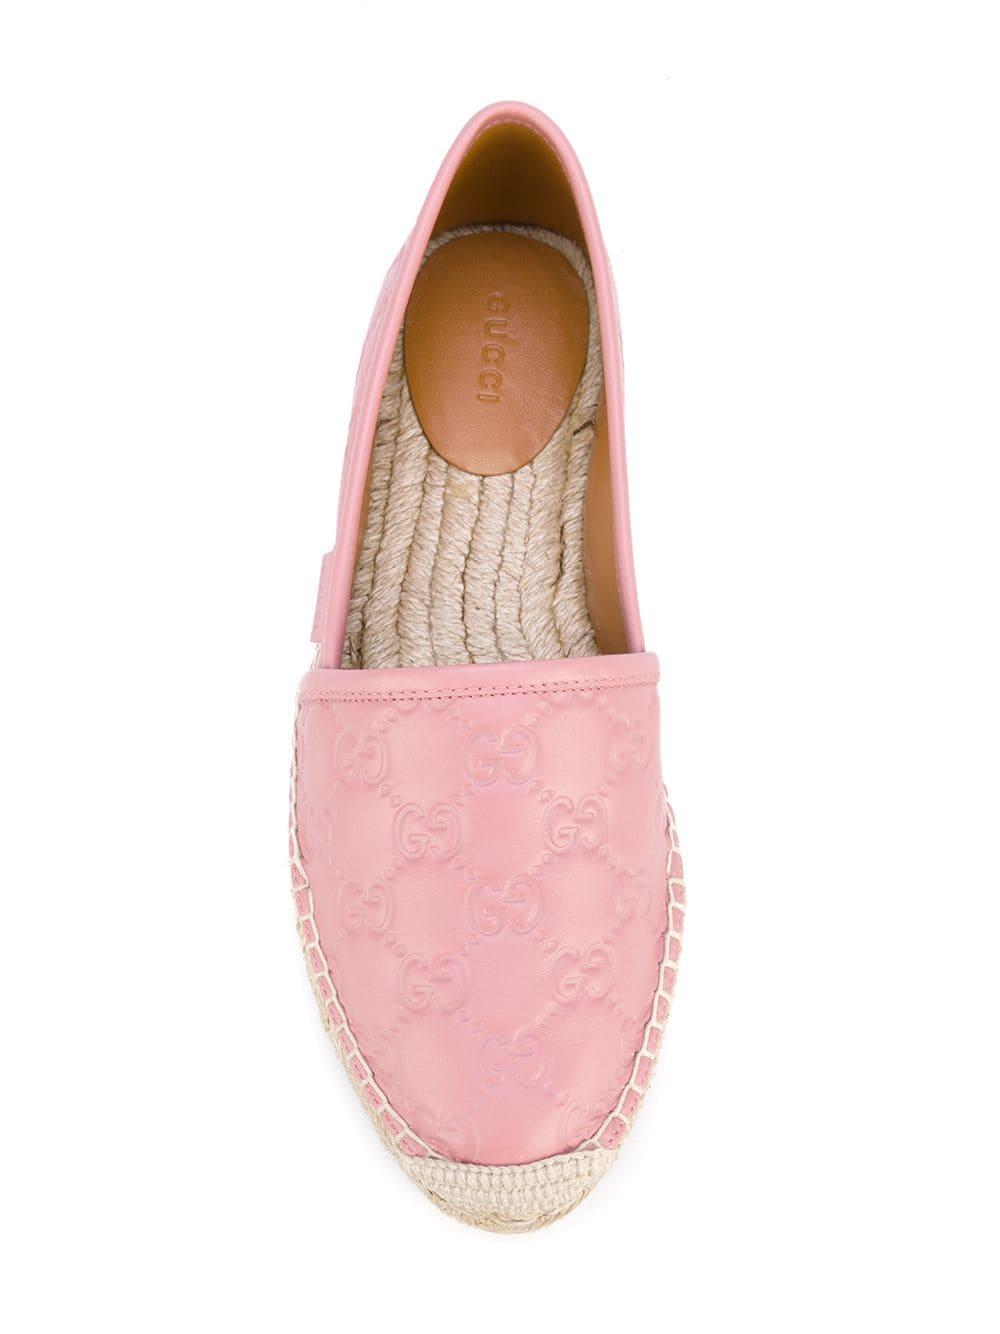 Gucci Leather GG Signature Espadrilles in Pink - Lyst